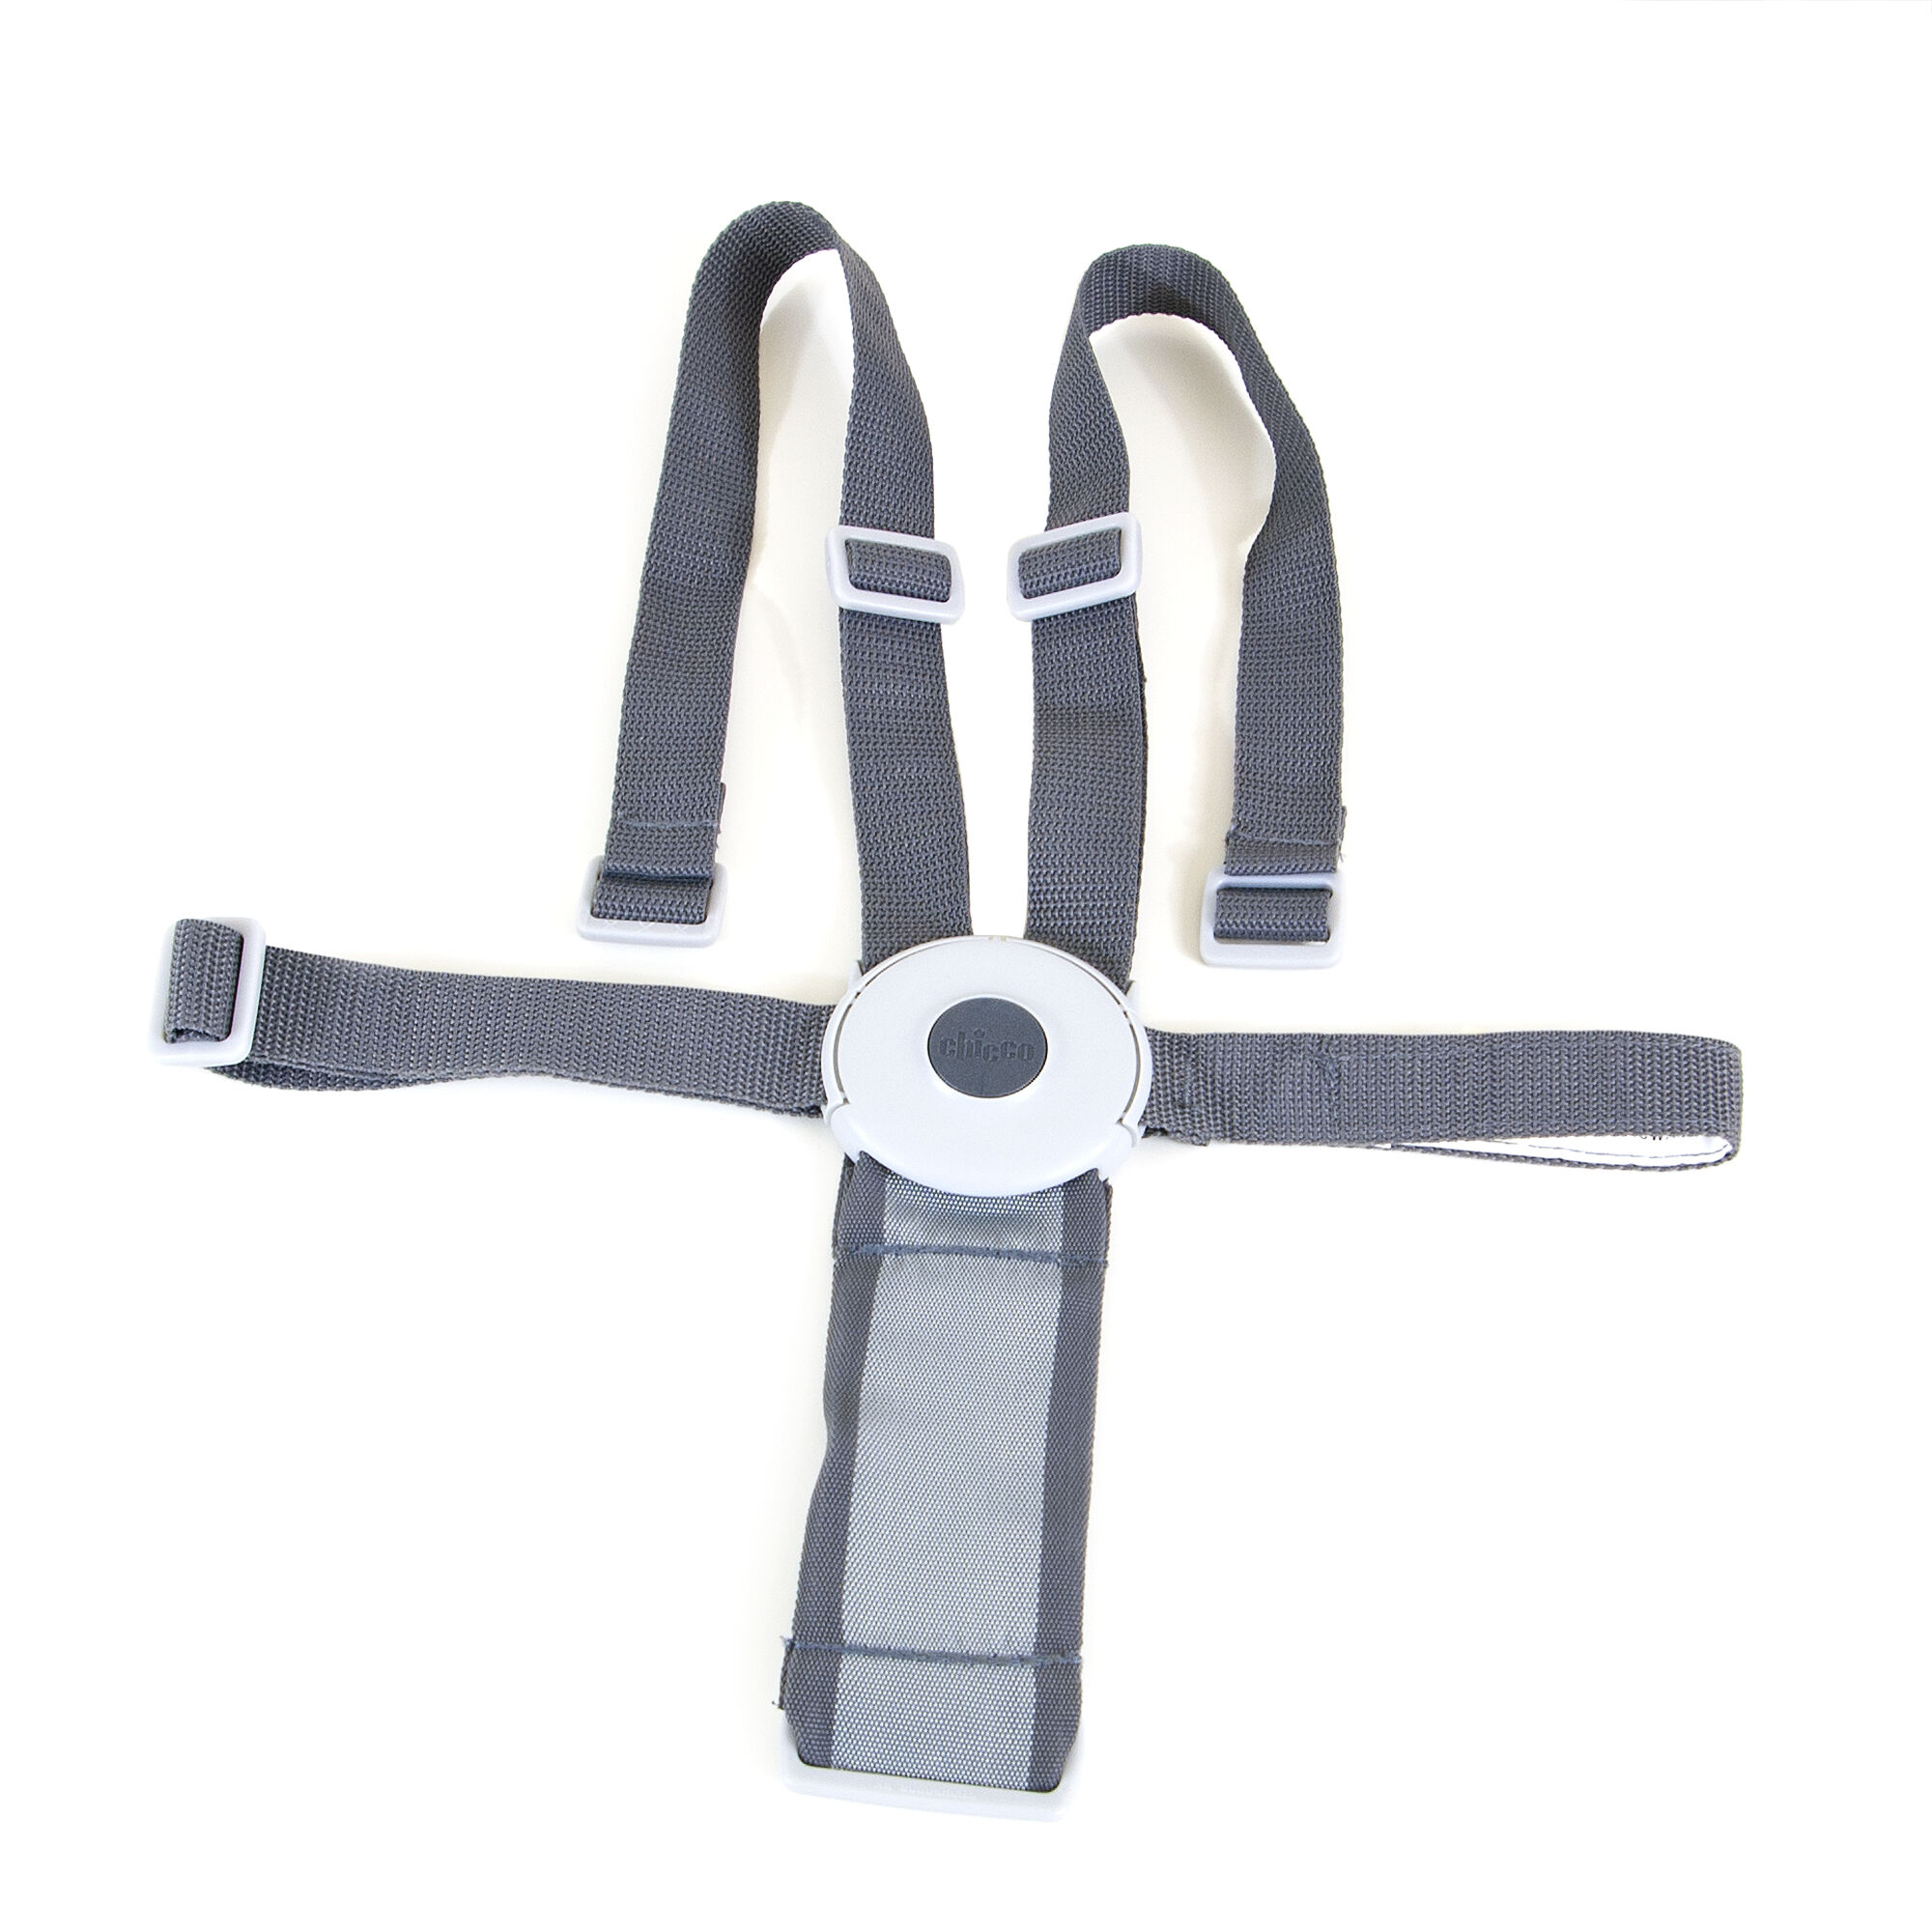 Chicco Polly 13 Harness